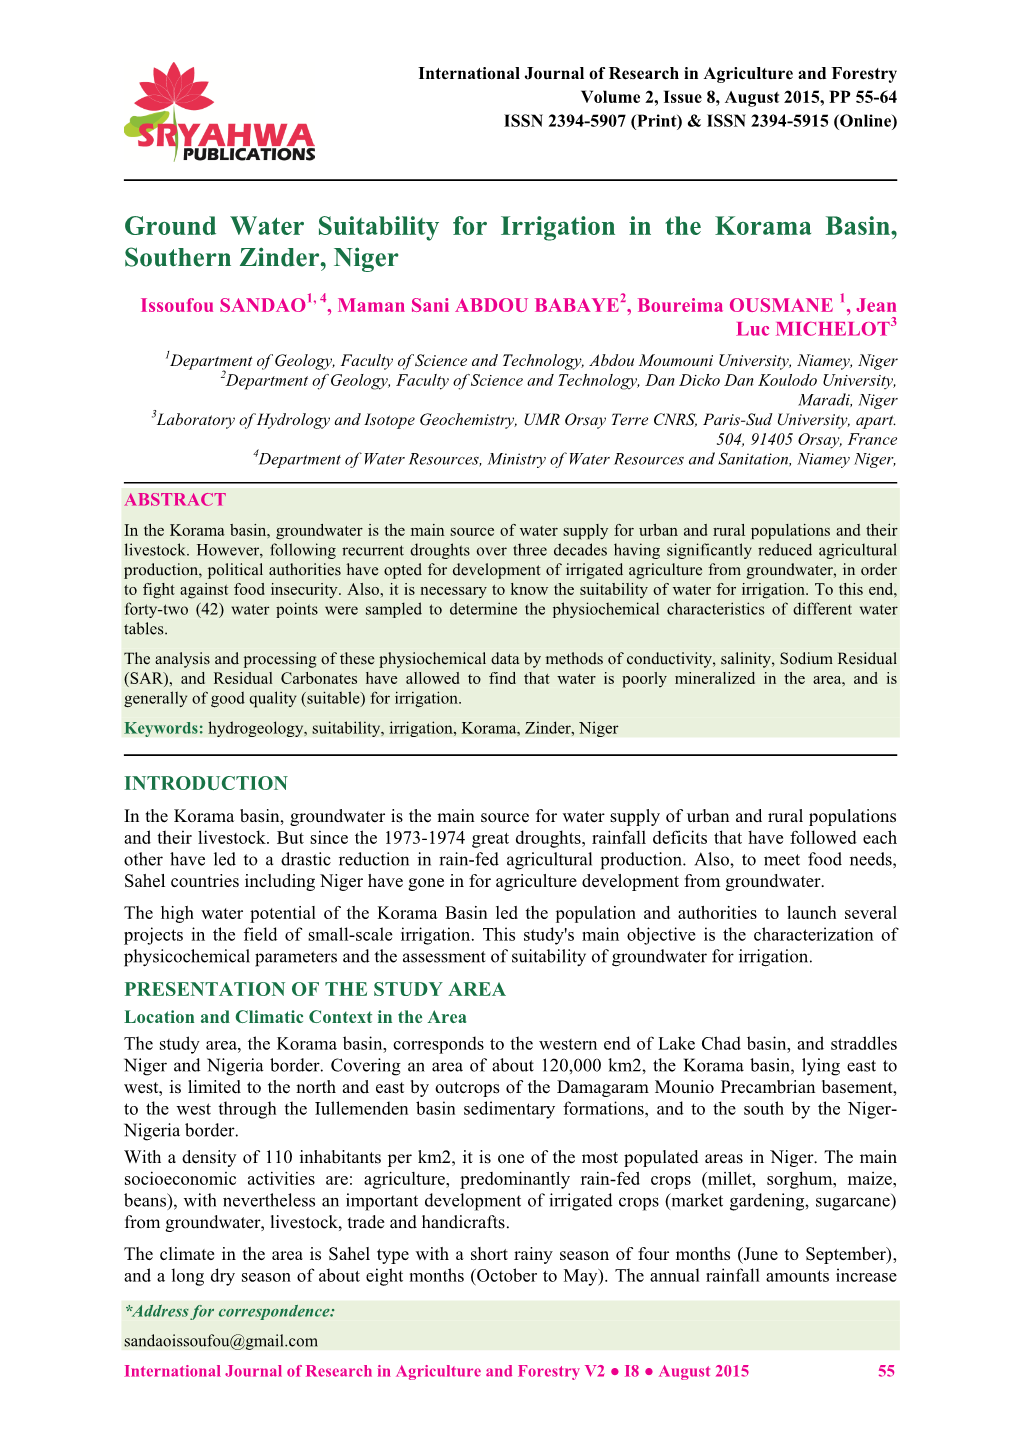 Ground Water Suitability for Irrigation in the Korama Basin, Southern Zinder, Niger